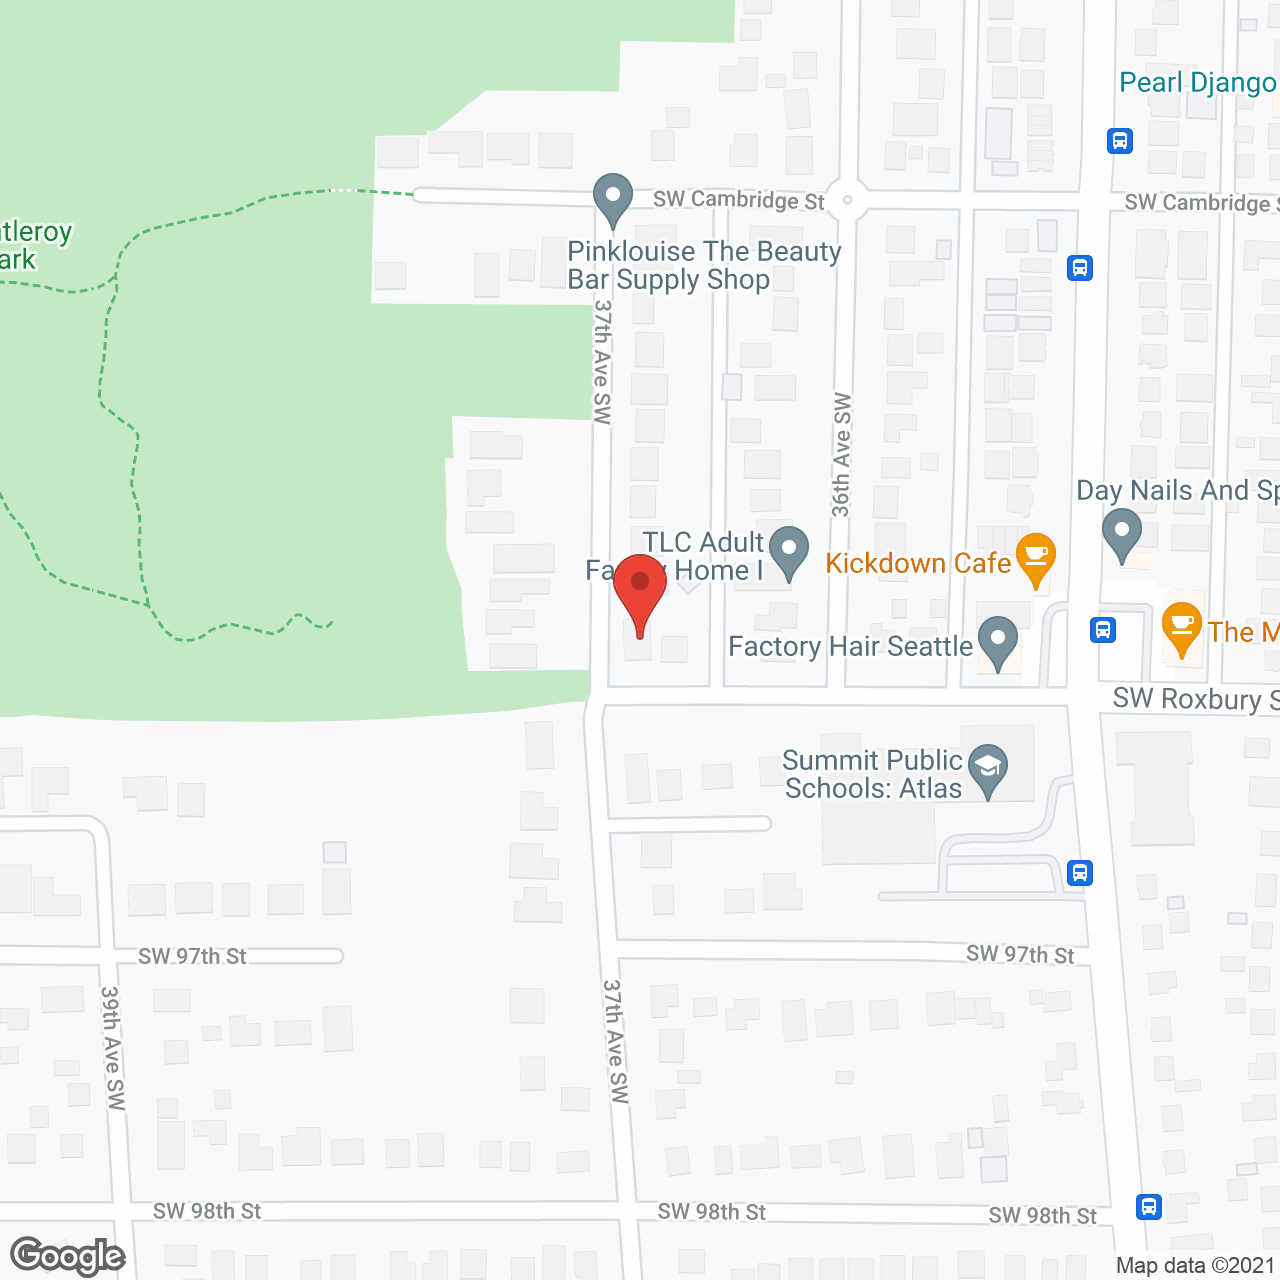 TLC Adult Family Home in google map